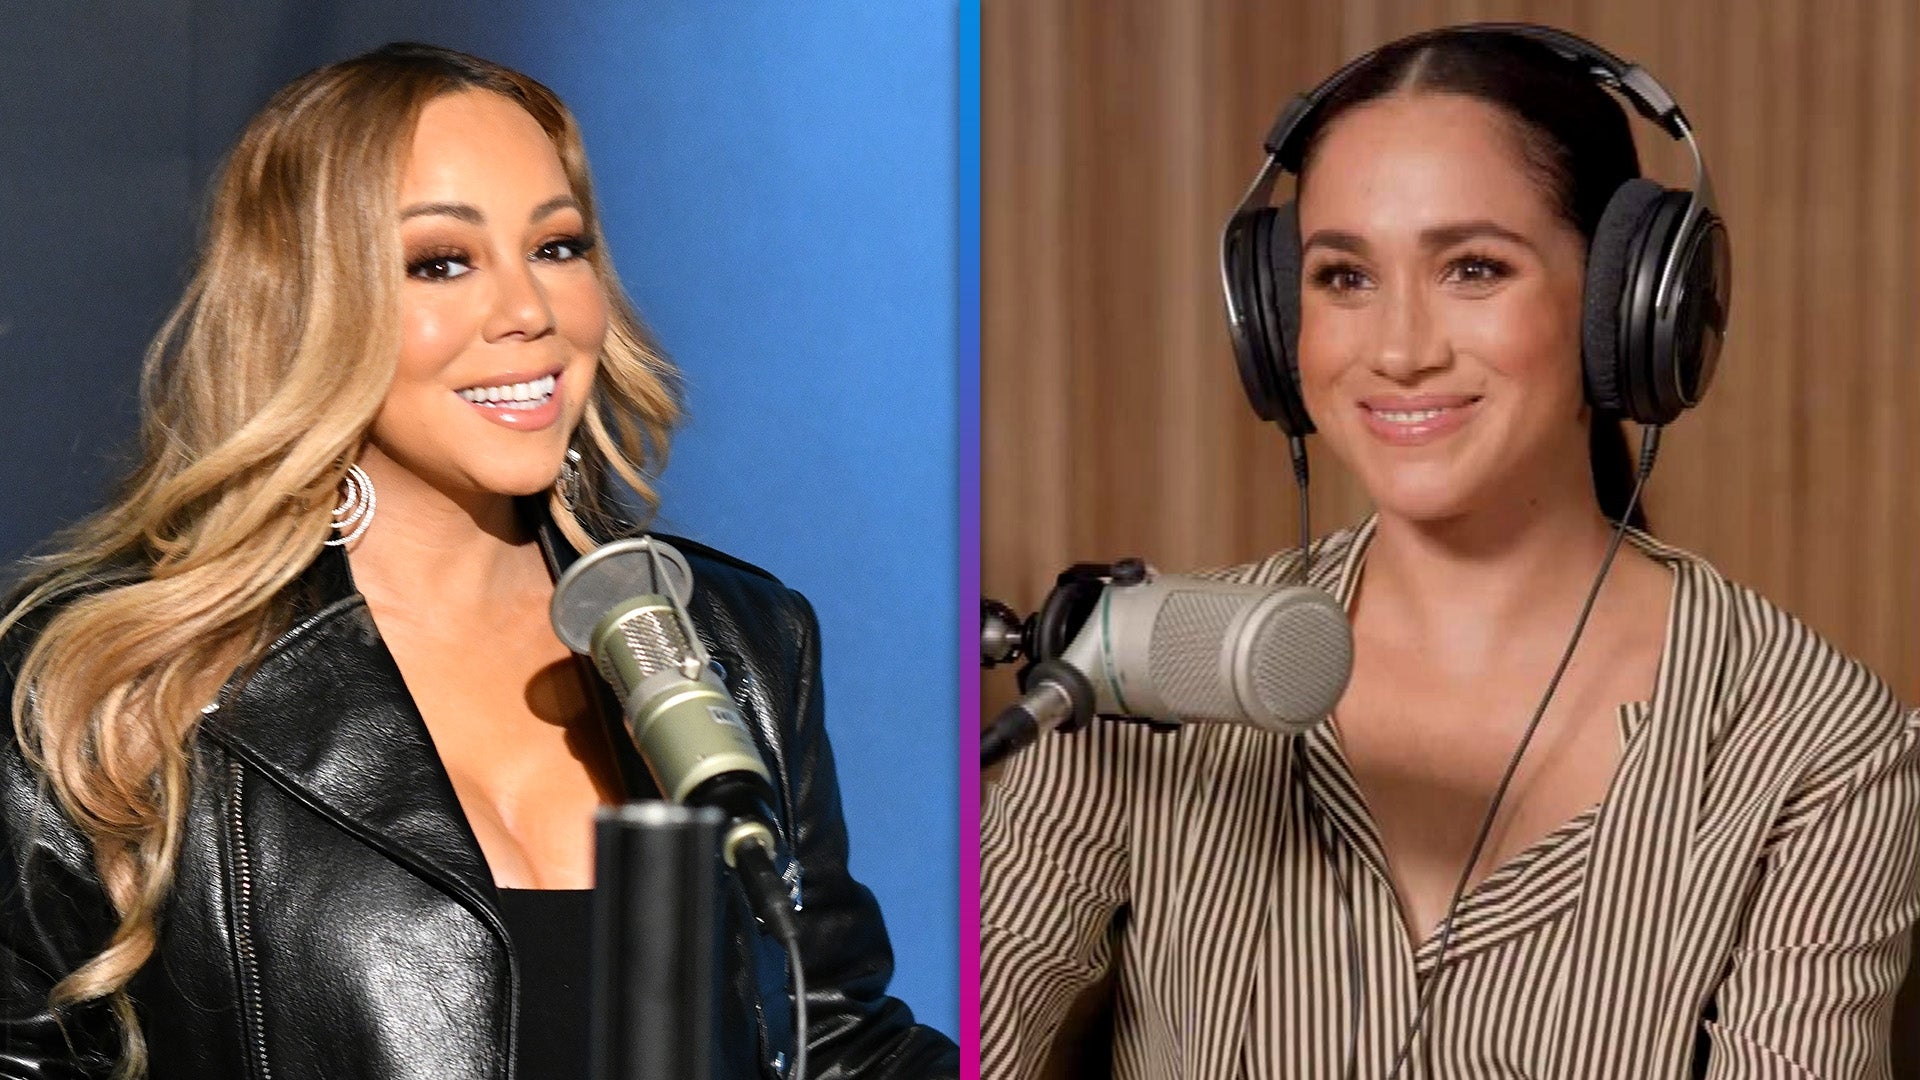 Meghan Markle Reacts to Mariah Carey Saying She Gives Diva Moments pic